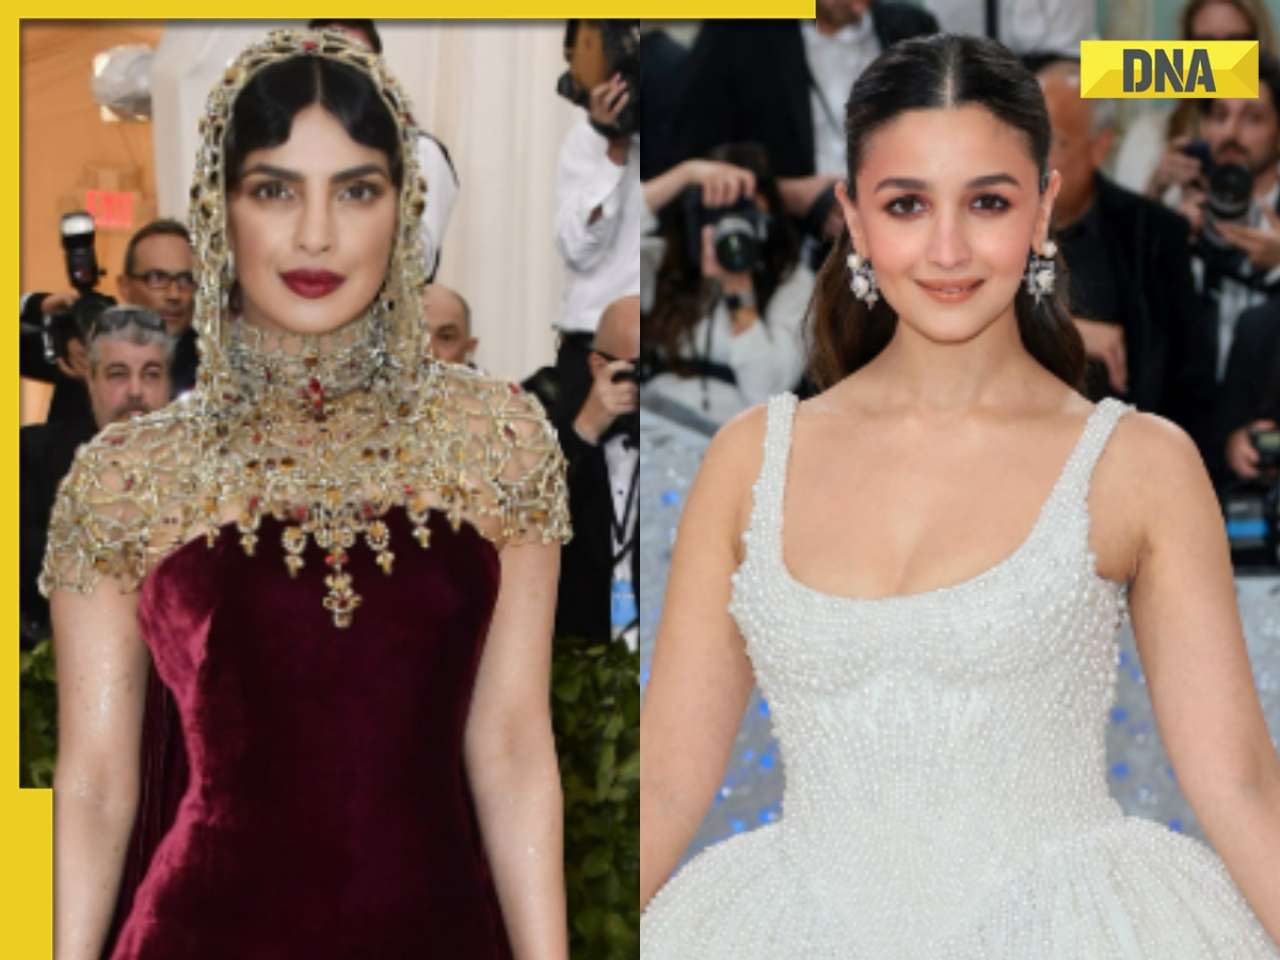 From no-selfie policy to ticket costing Rs 25 lakh and a table worth Rs 20 crore, inside secrets of Met Gala revealed